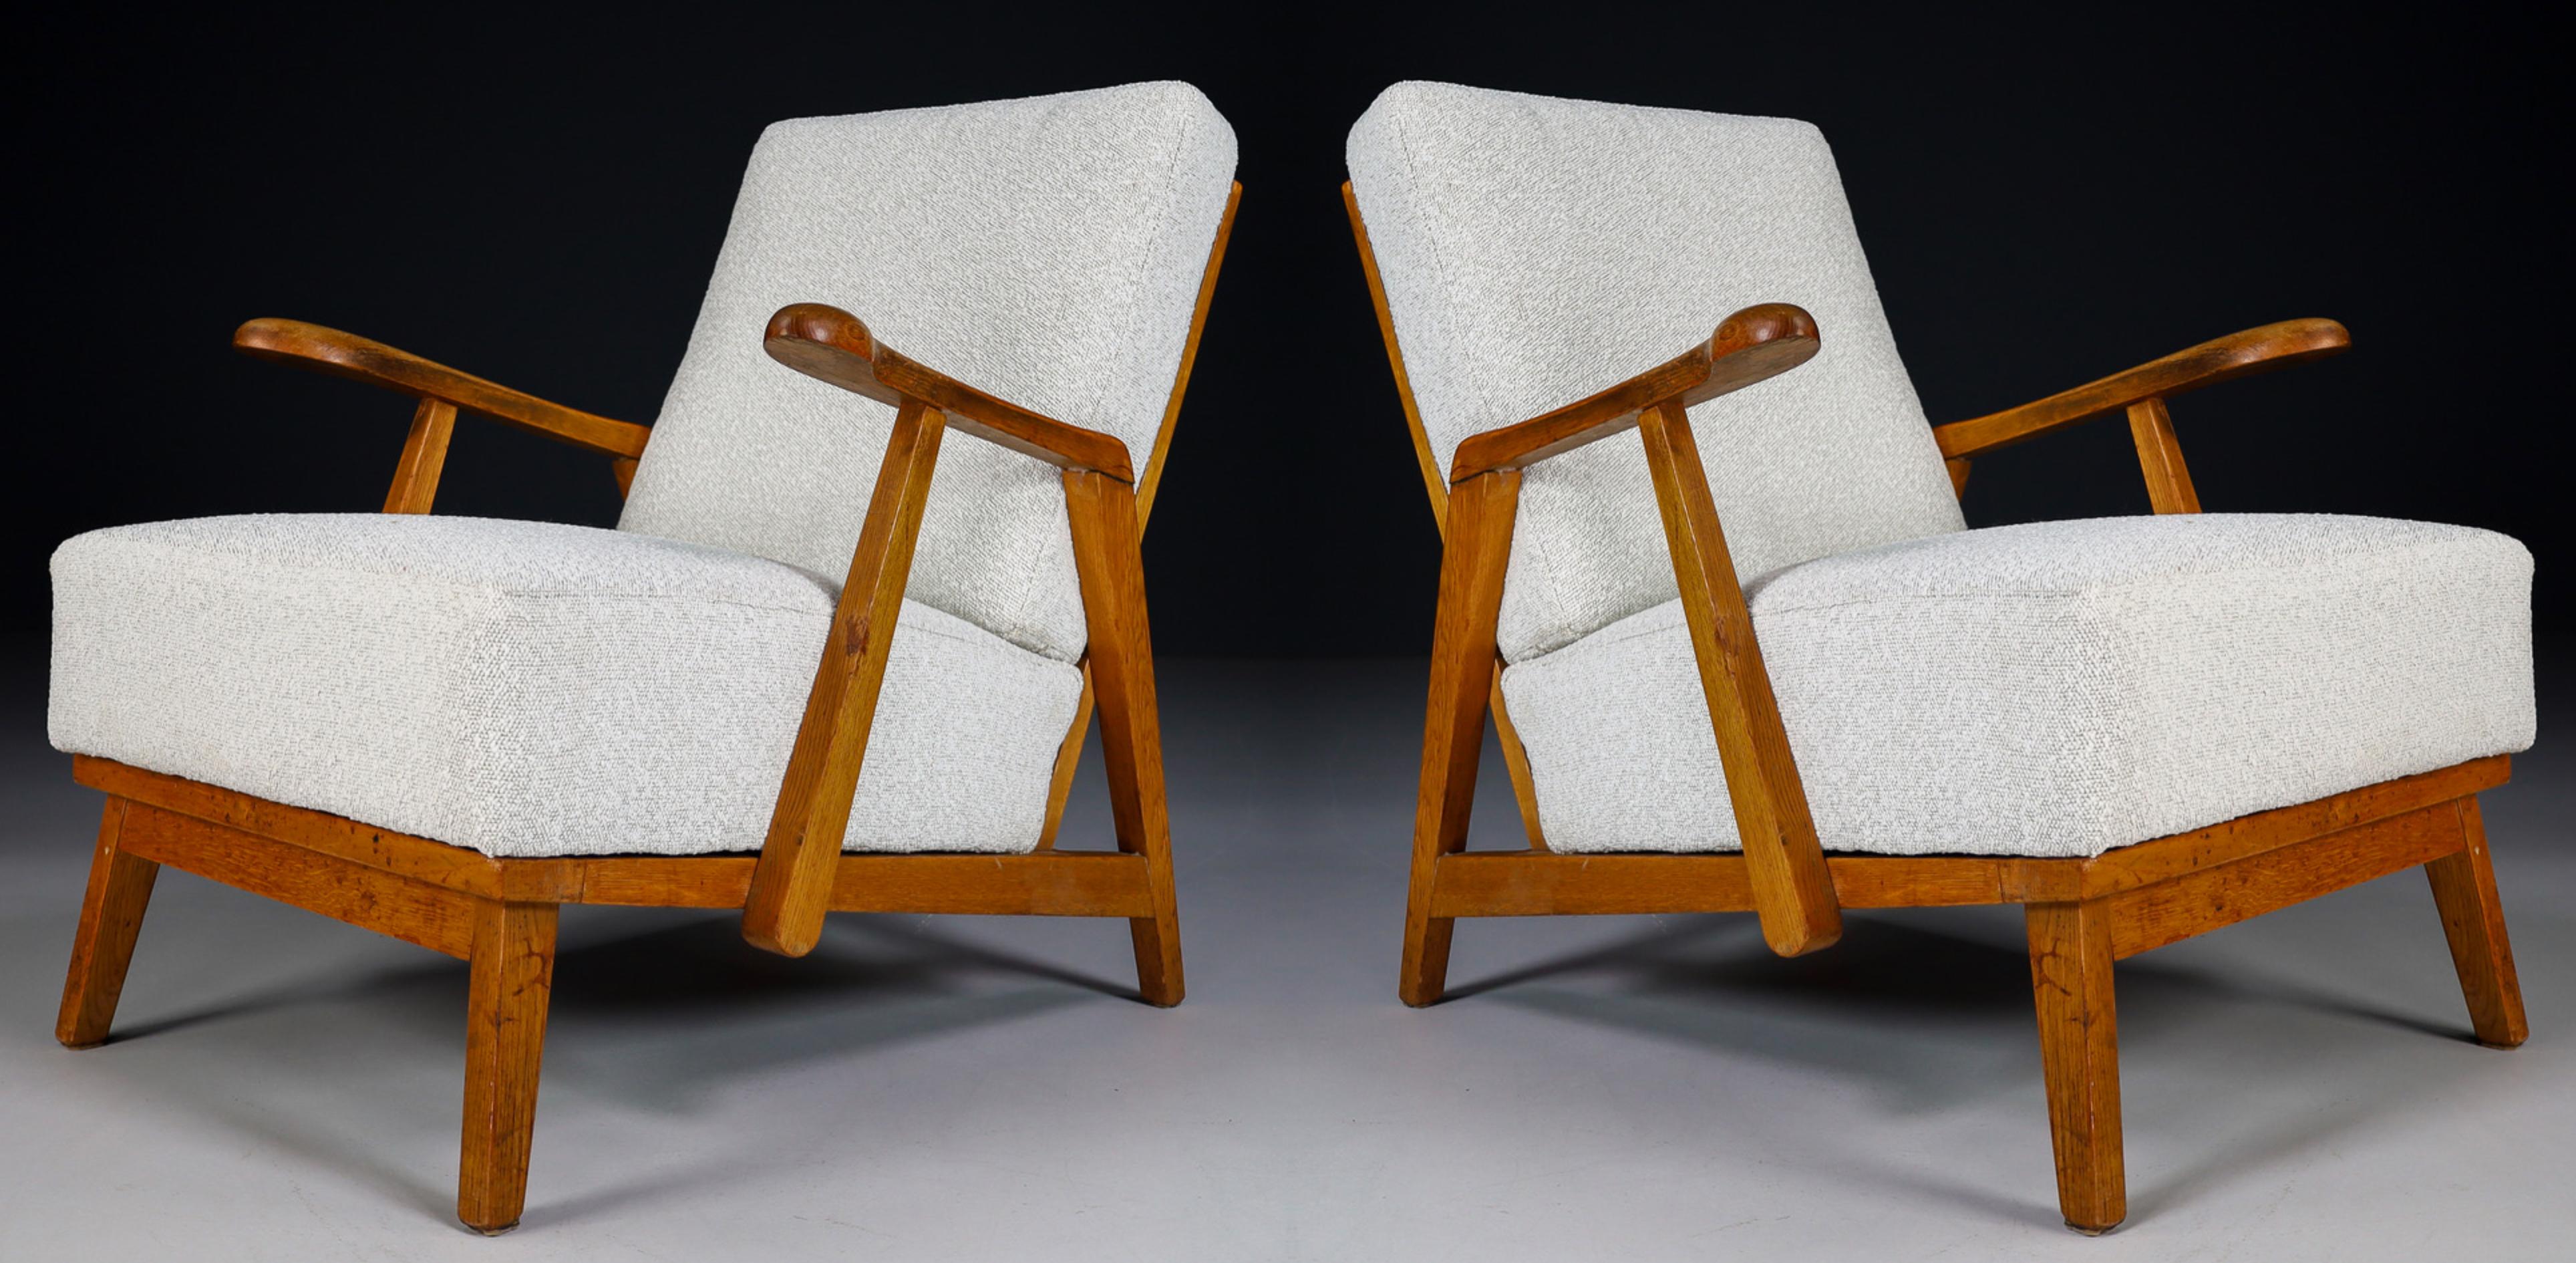 Pair of two original midcentury sculptural armchairs or lounge chairs manufactured and designed in France 1940s. Made of solid oak and professionally reupholstered in new bouclé fabric. These armchairs would make an eye-catching addition to any